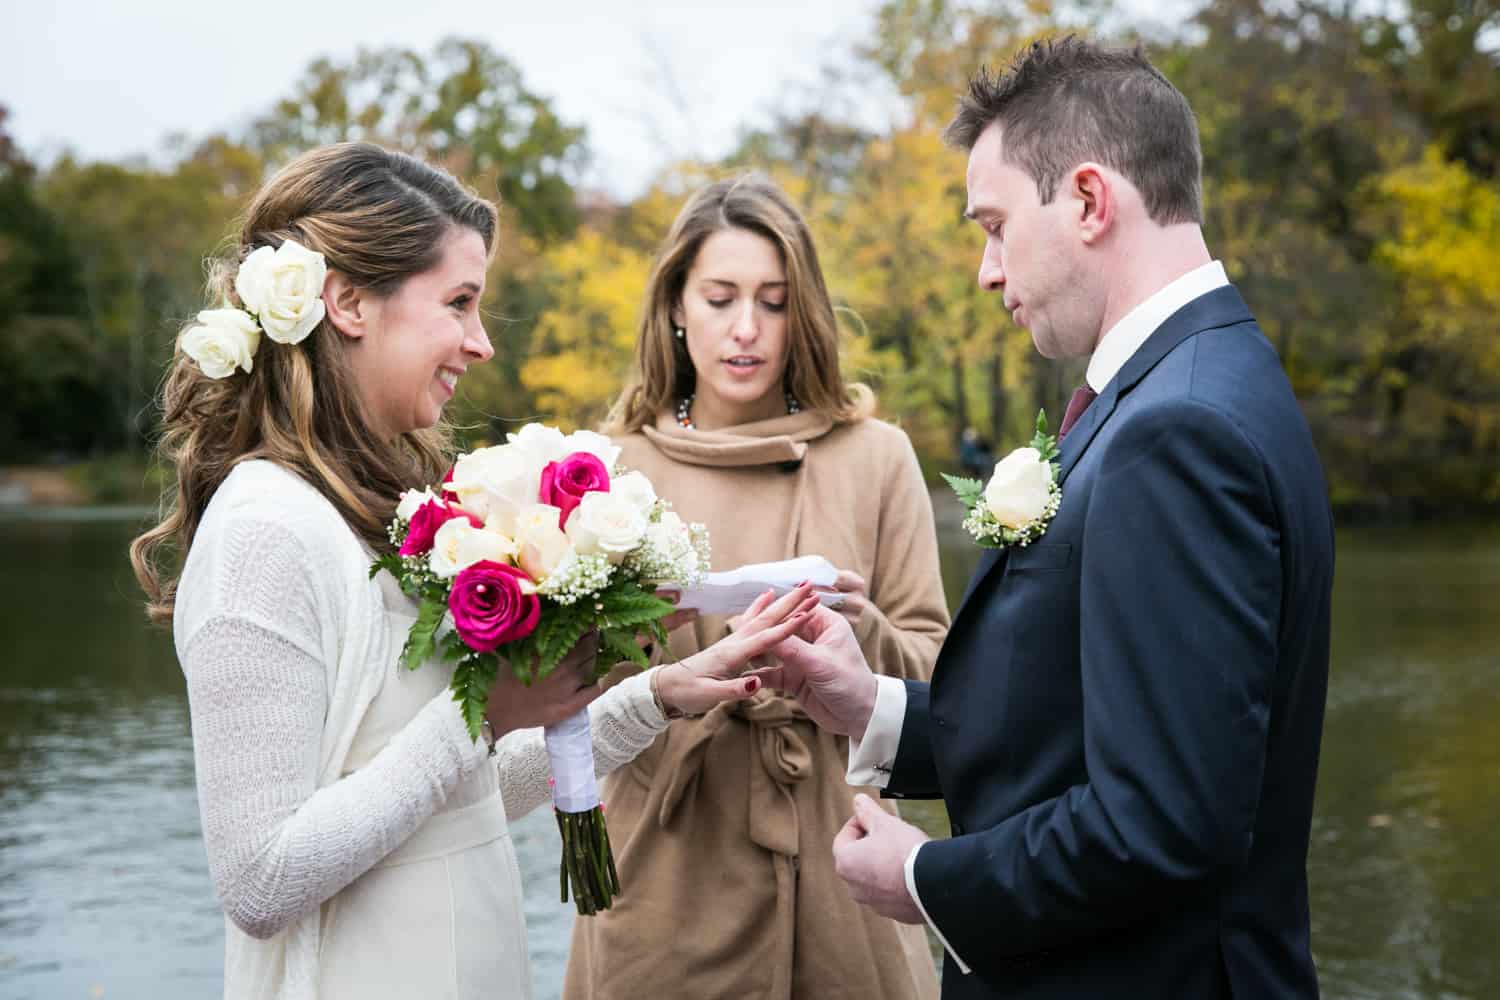 Groom putting ring on bride's finger at a Bethesda Fountain wedding in Central Park